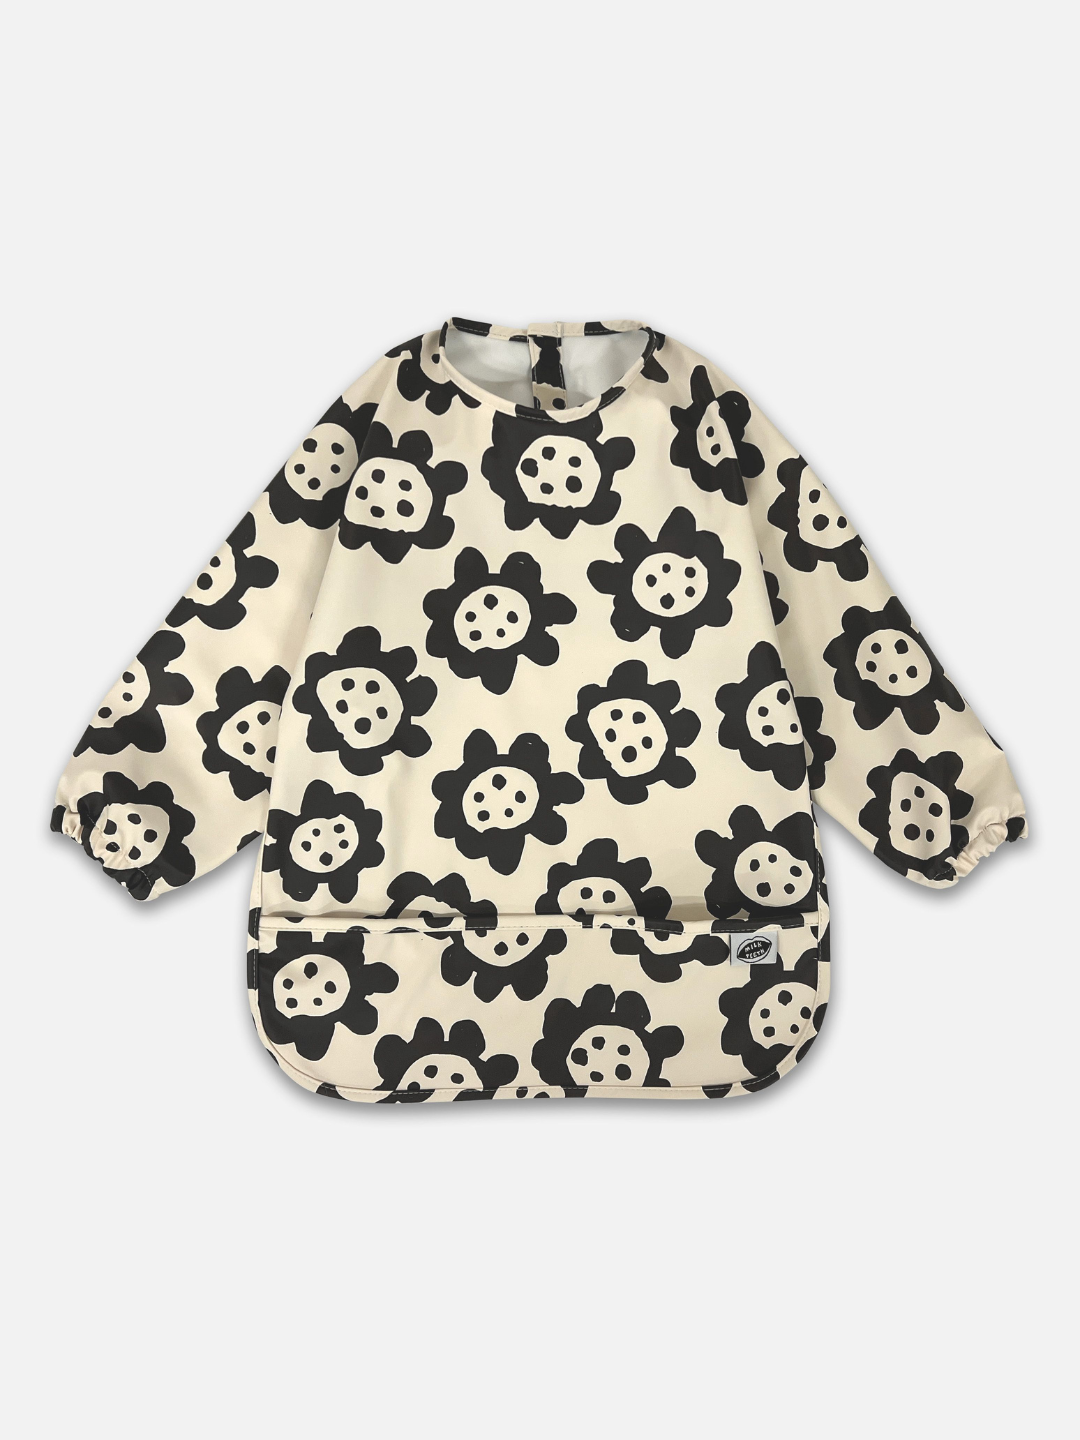 A front view of the long sleeve cream colored bib with black sunflowers and a front pocket.